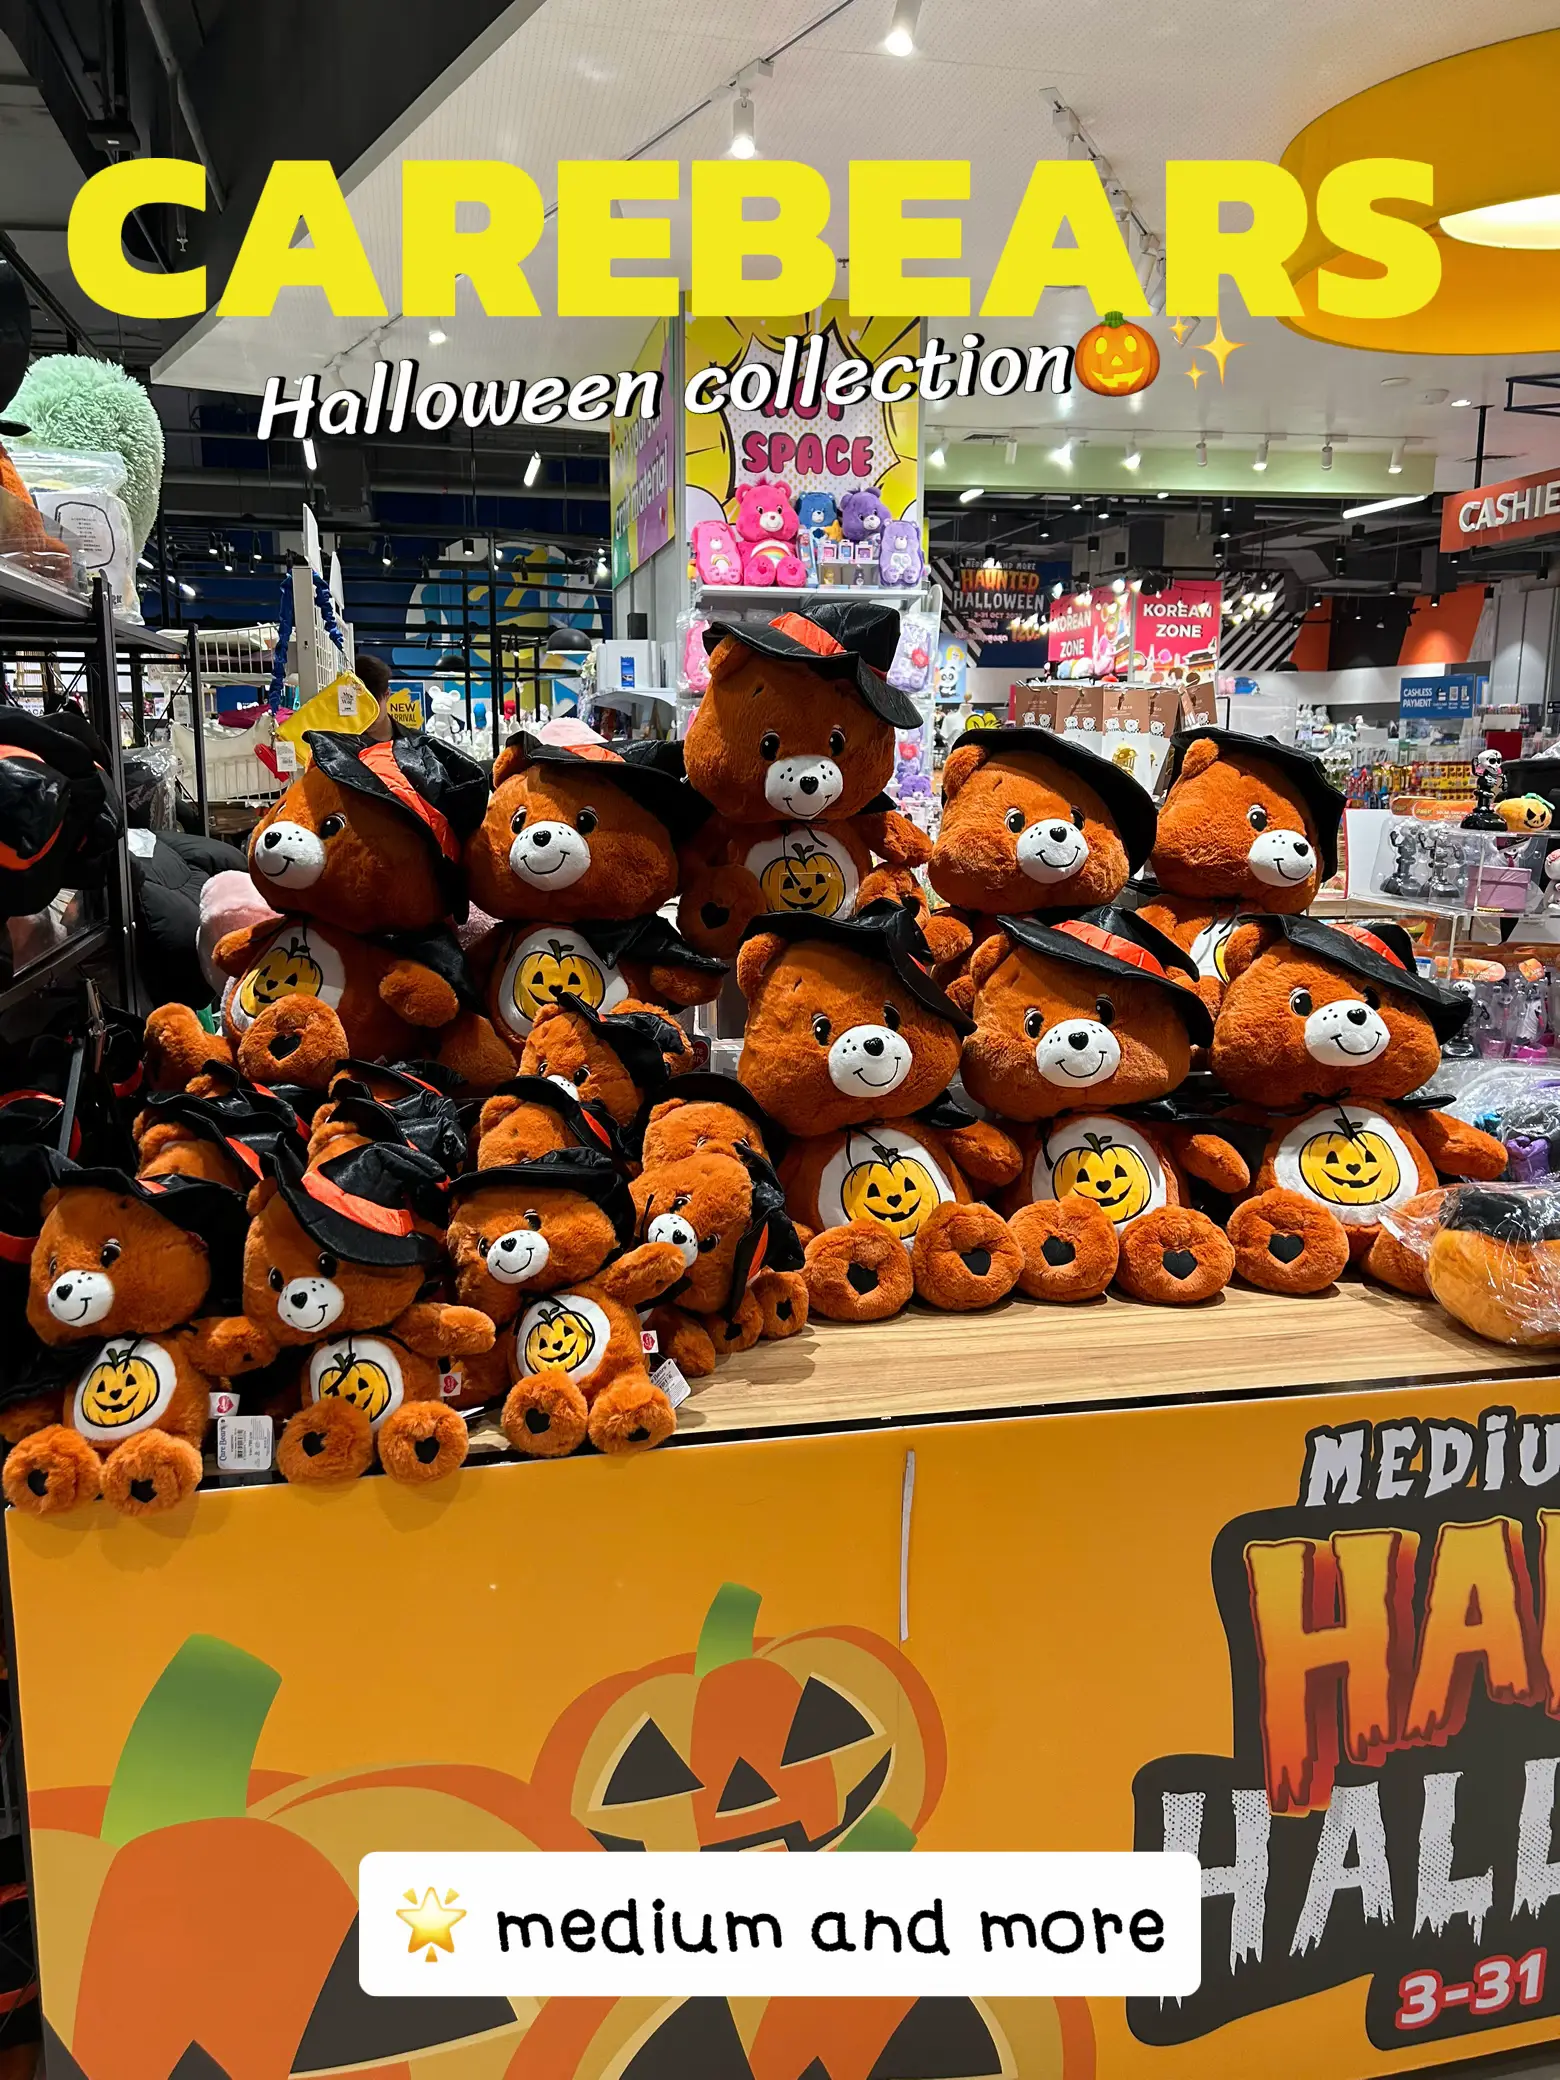 Build-A-Bear Workshop - Happy Halloween! 🕷🎃👻🦇 Check out how